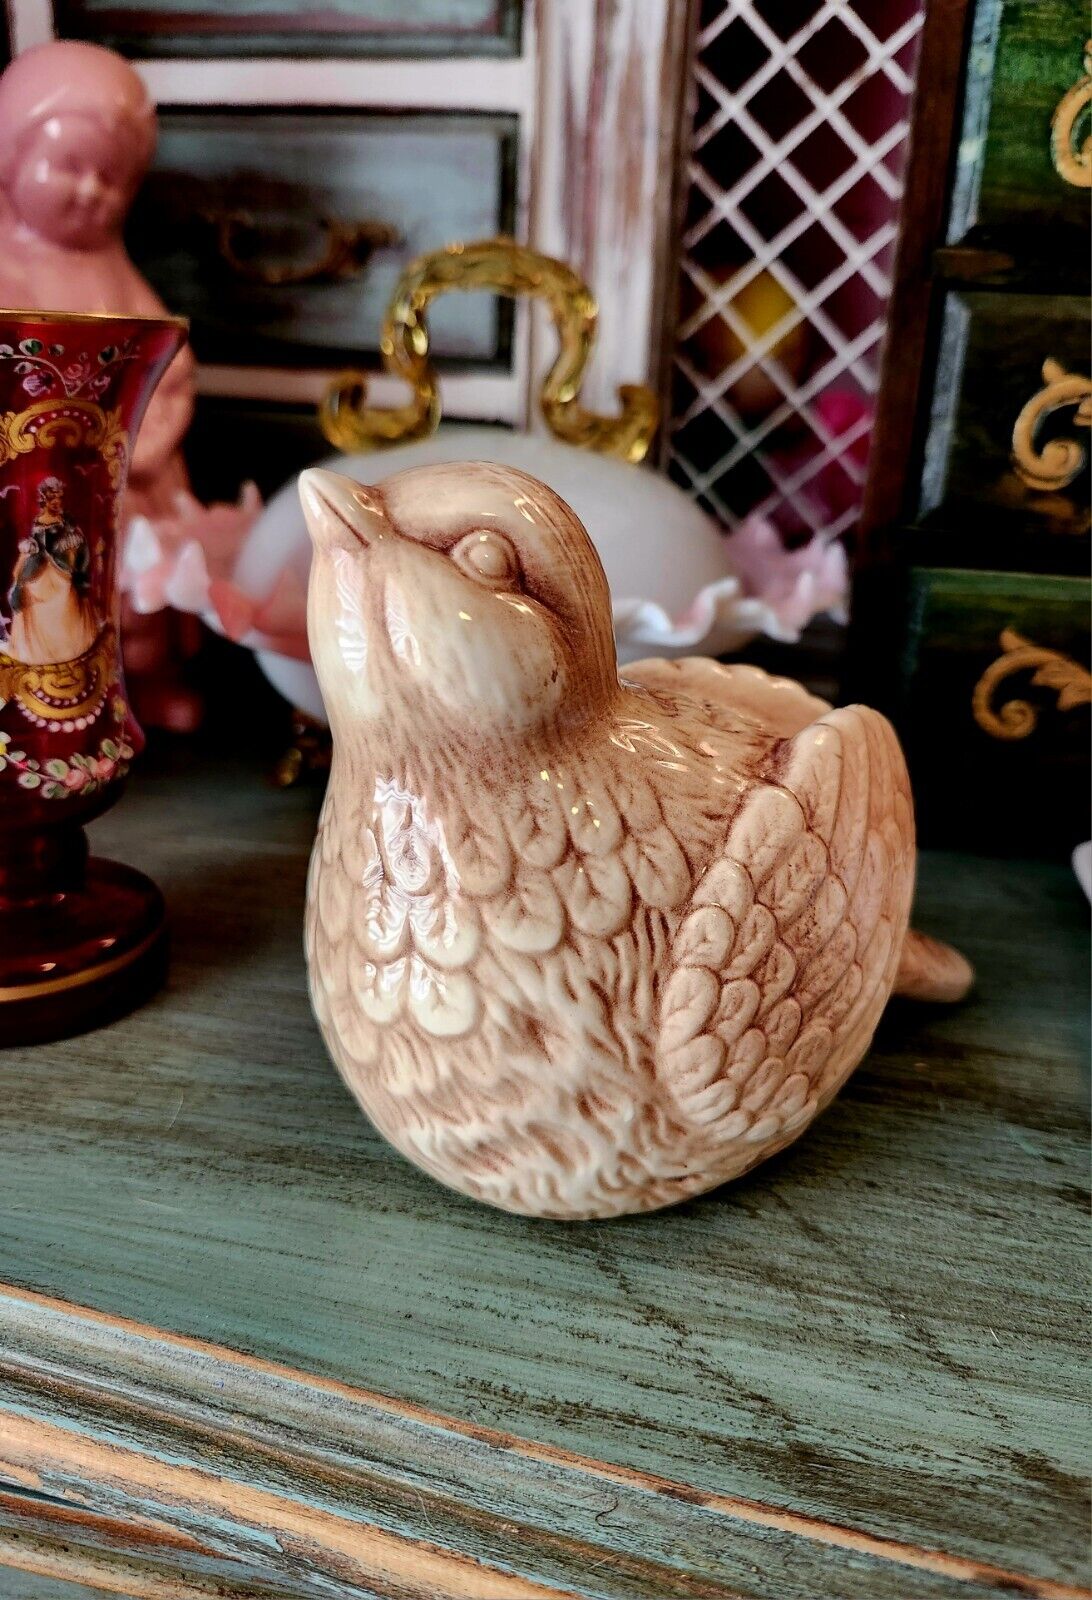 Shabby Chic Possibly Vintage Ceramic Bird Figure With Numbers On The Bottom